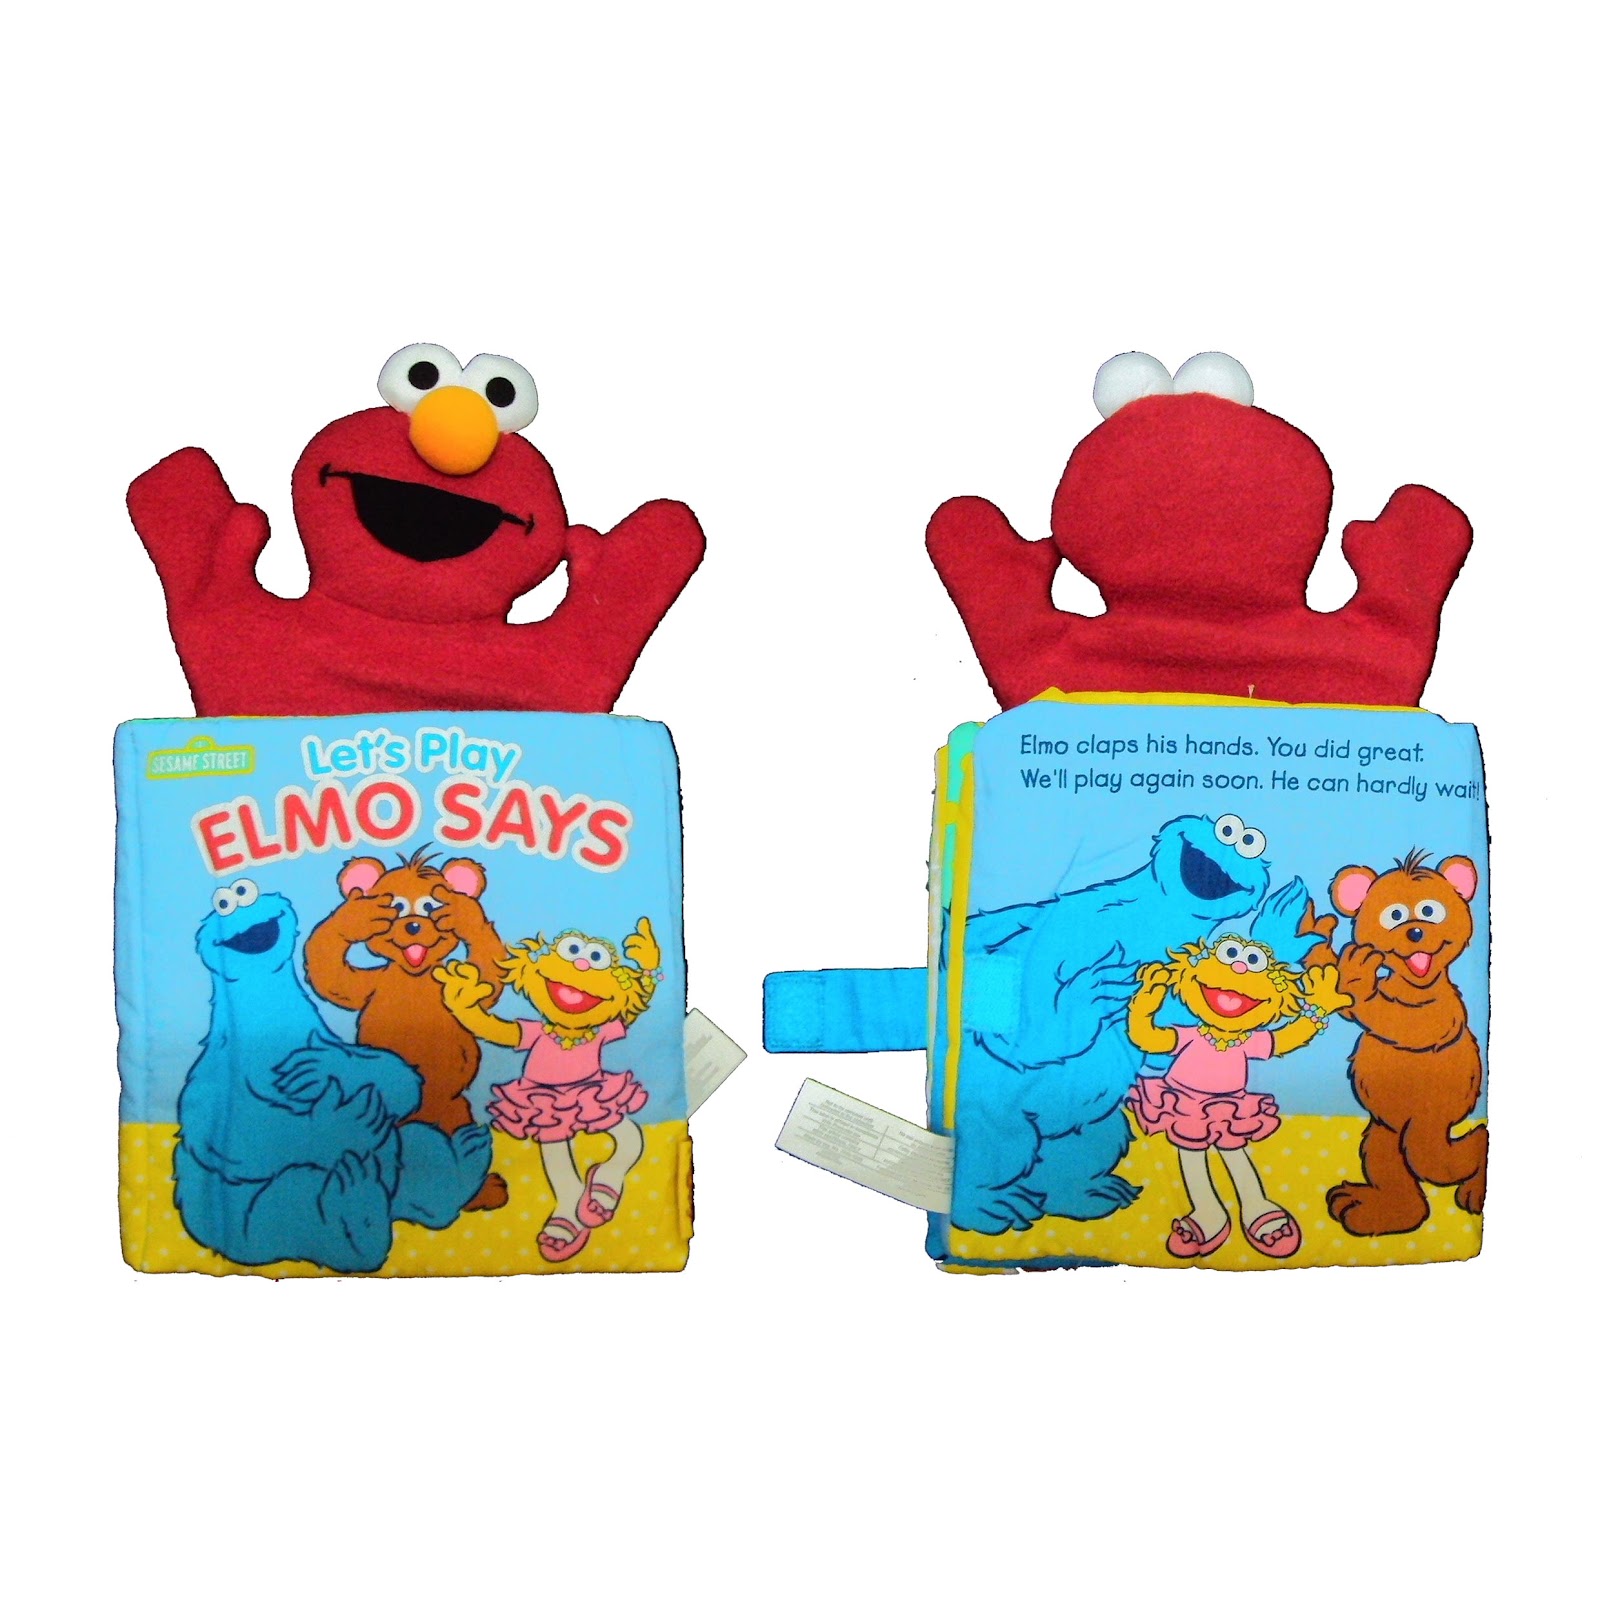 Storetopia!: Puppet Book - Let's Play Elmo Says